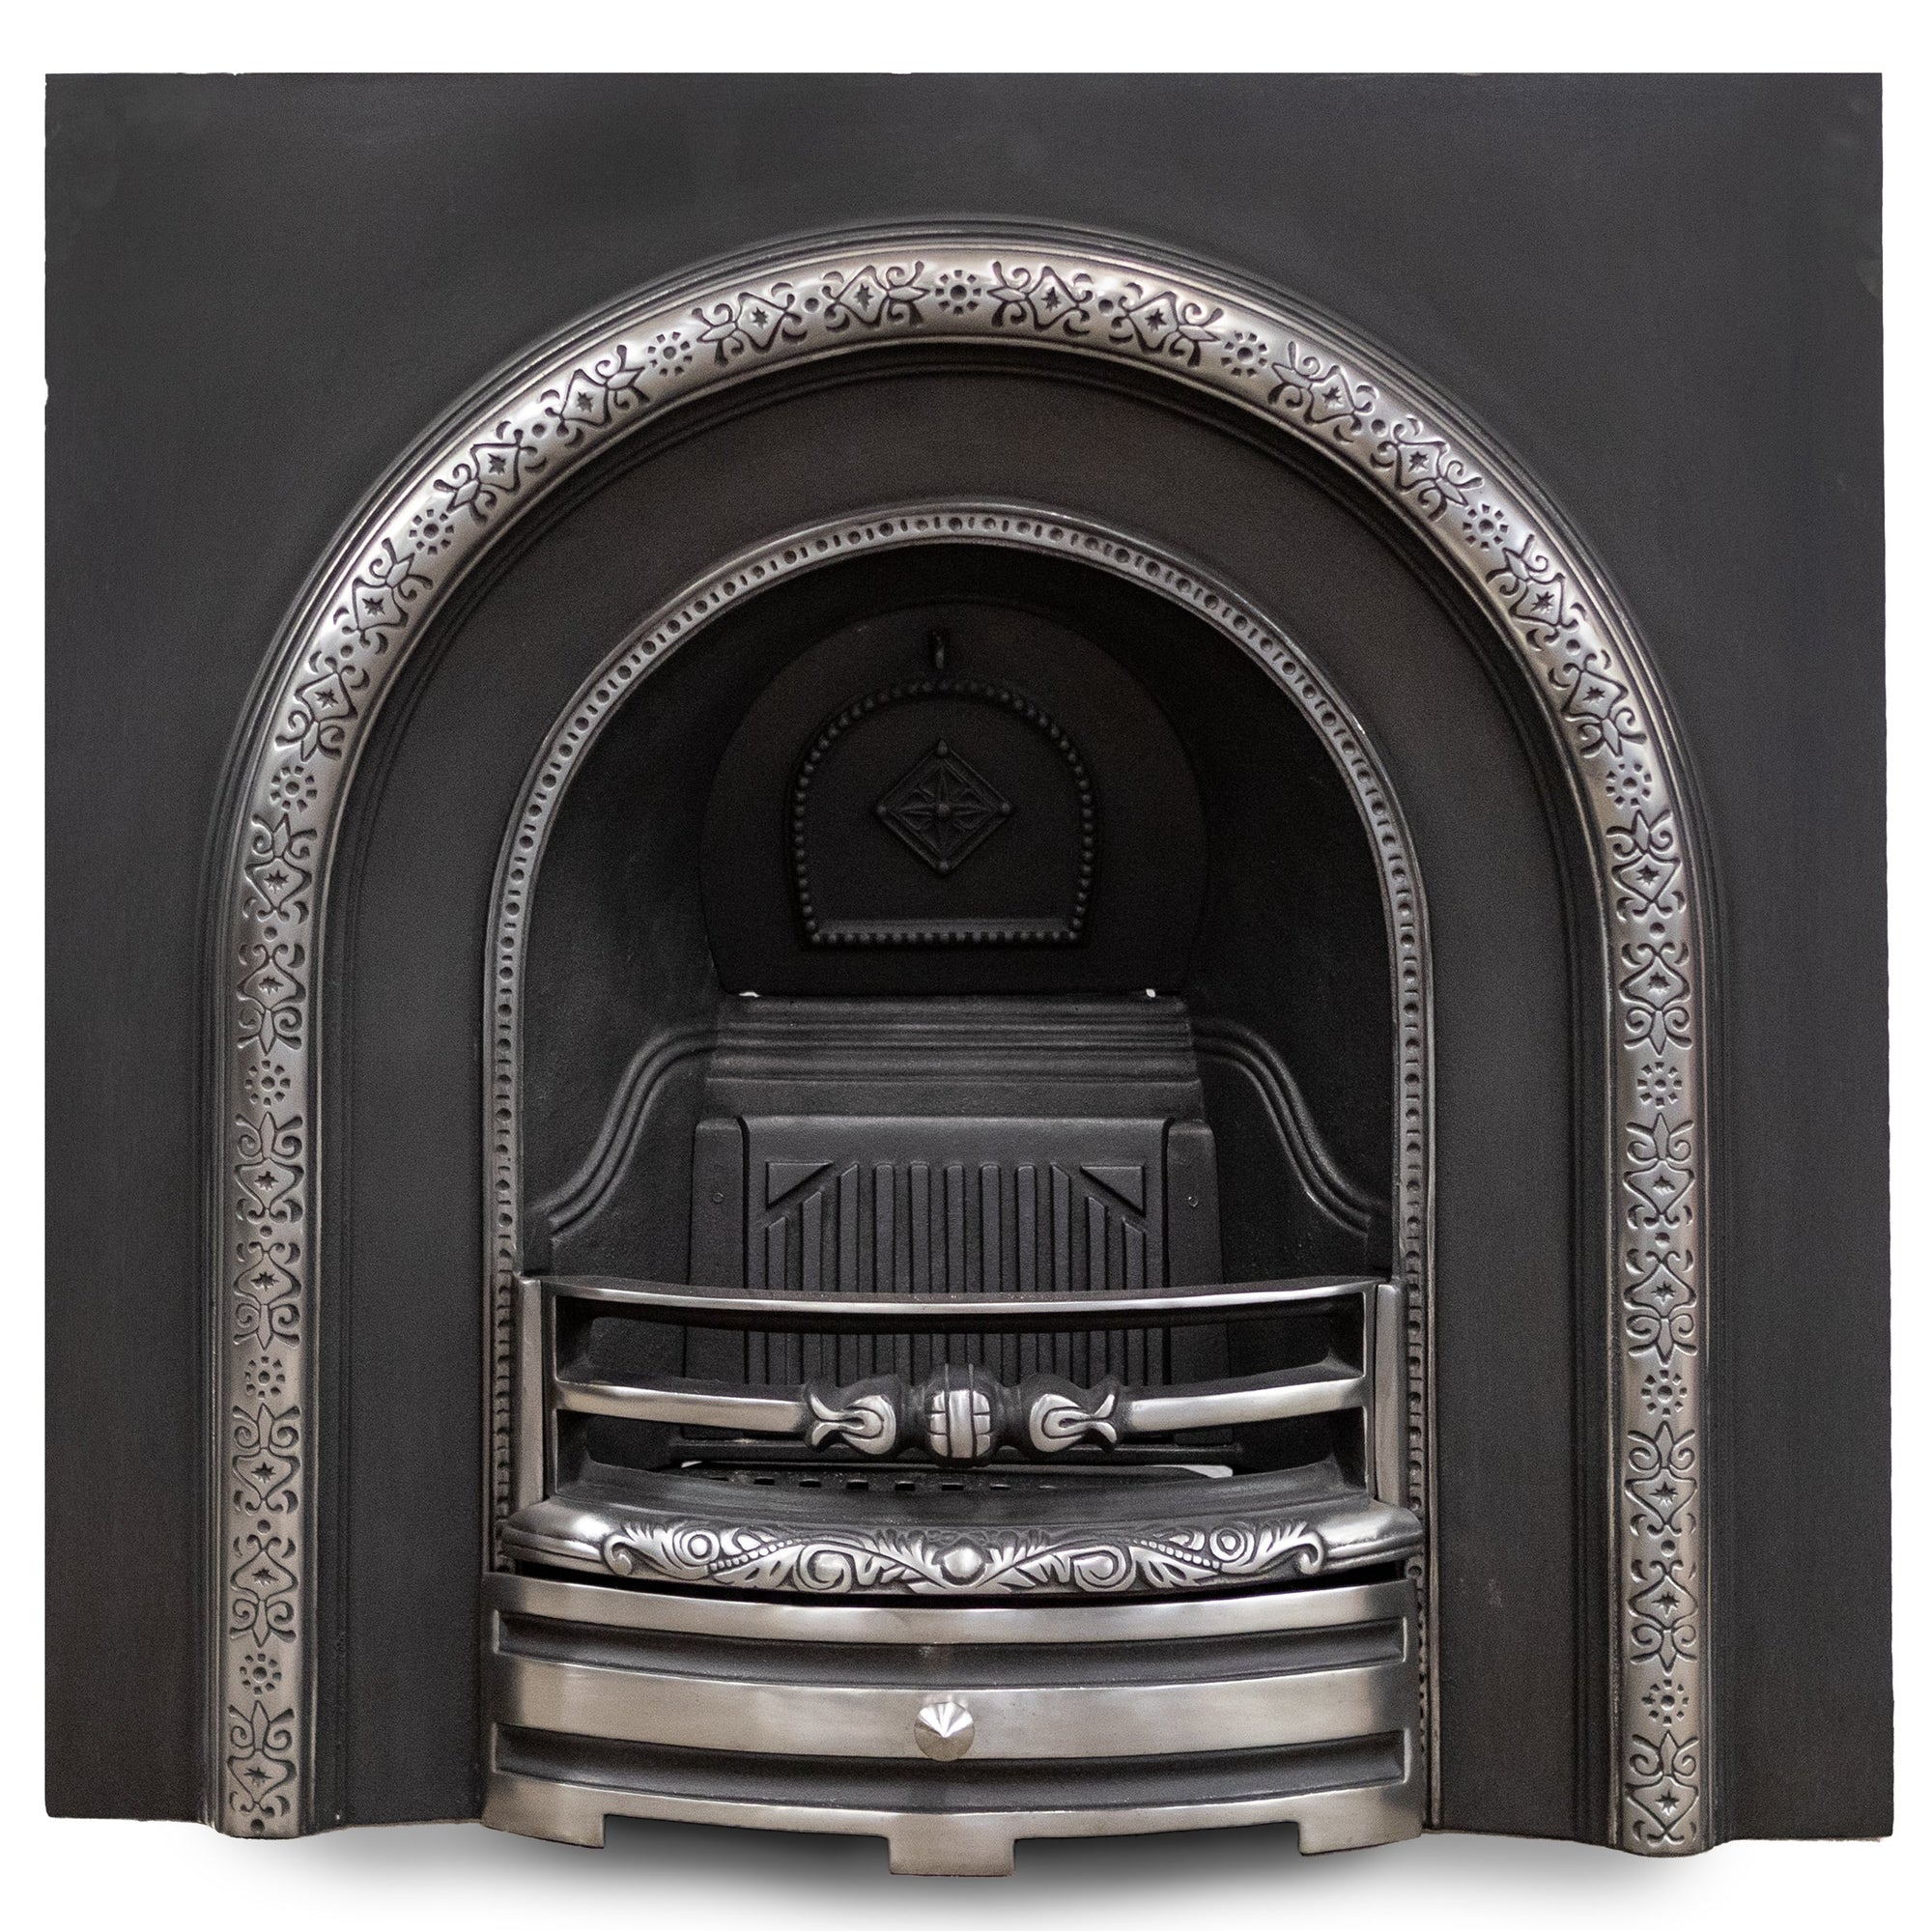 Reclaimed Victorian Style Arched Fireplace Insert | The Architectural Forum